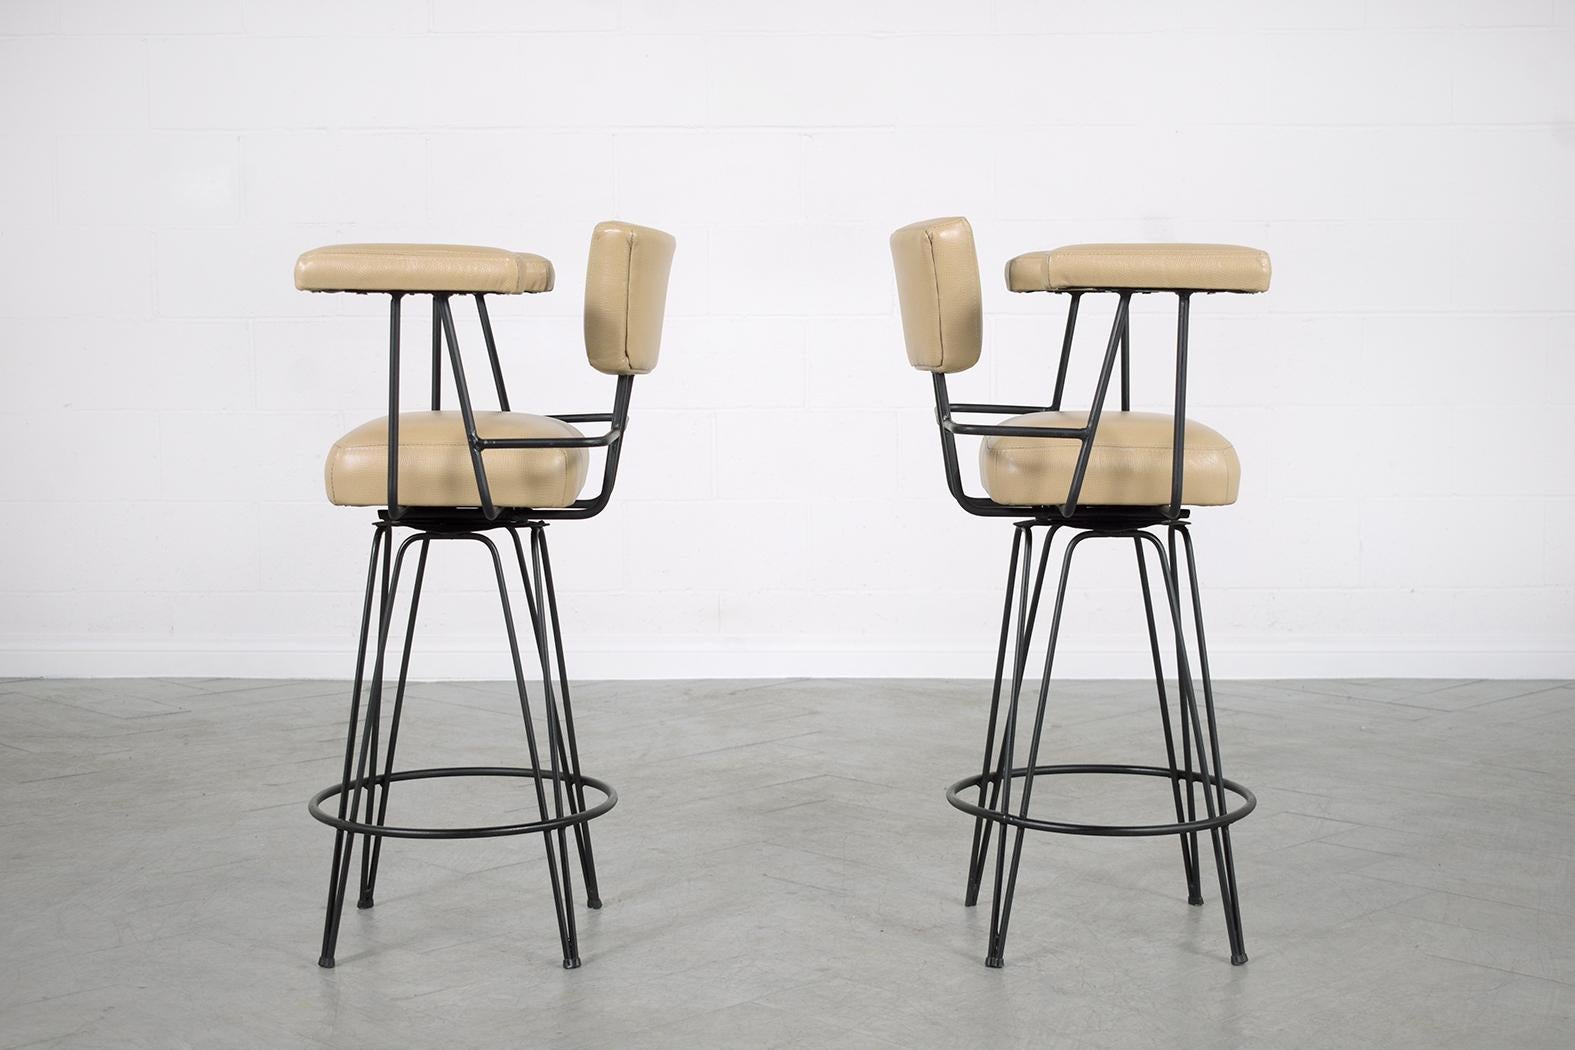 Restored 1970s Mid-Century Modern Swivel Barstools in Beige Leather For Sale 2